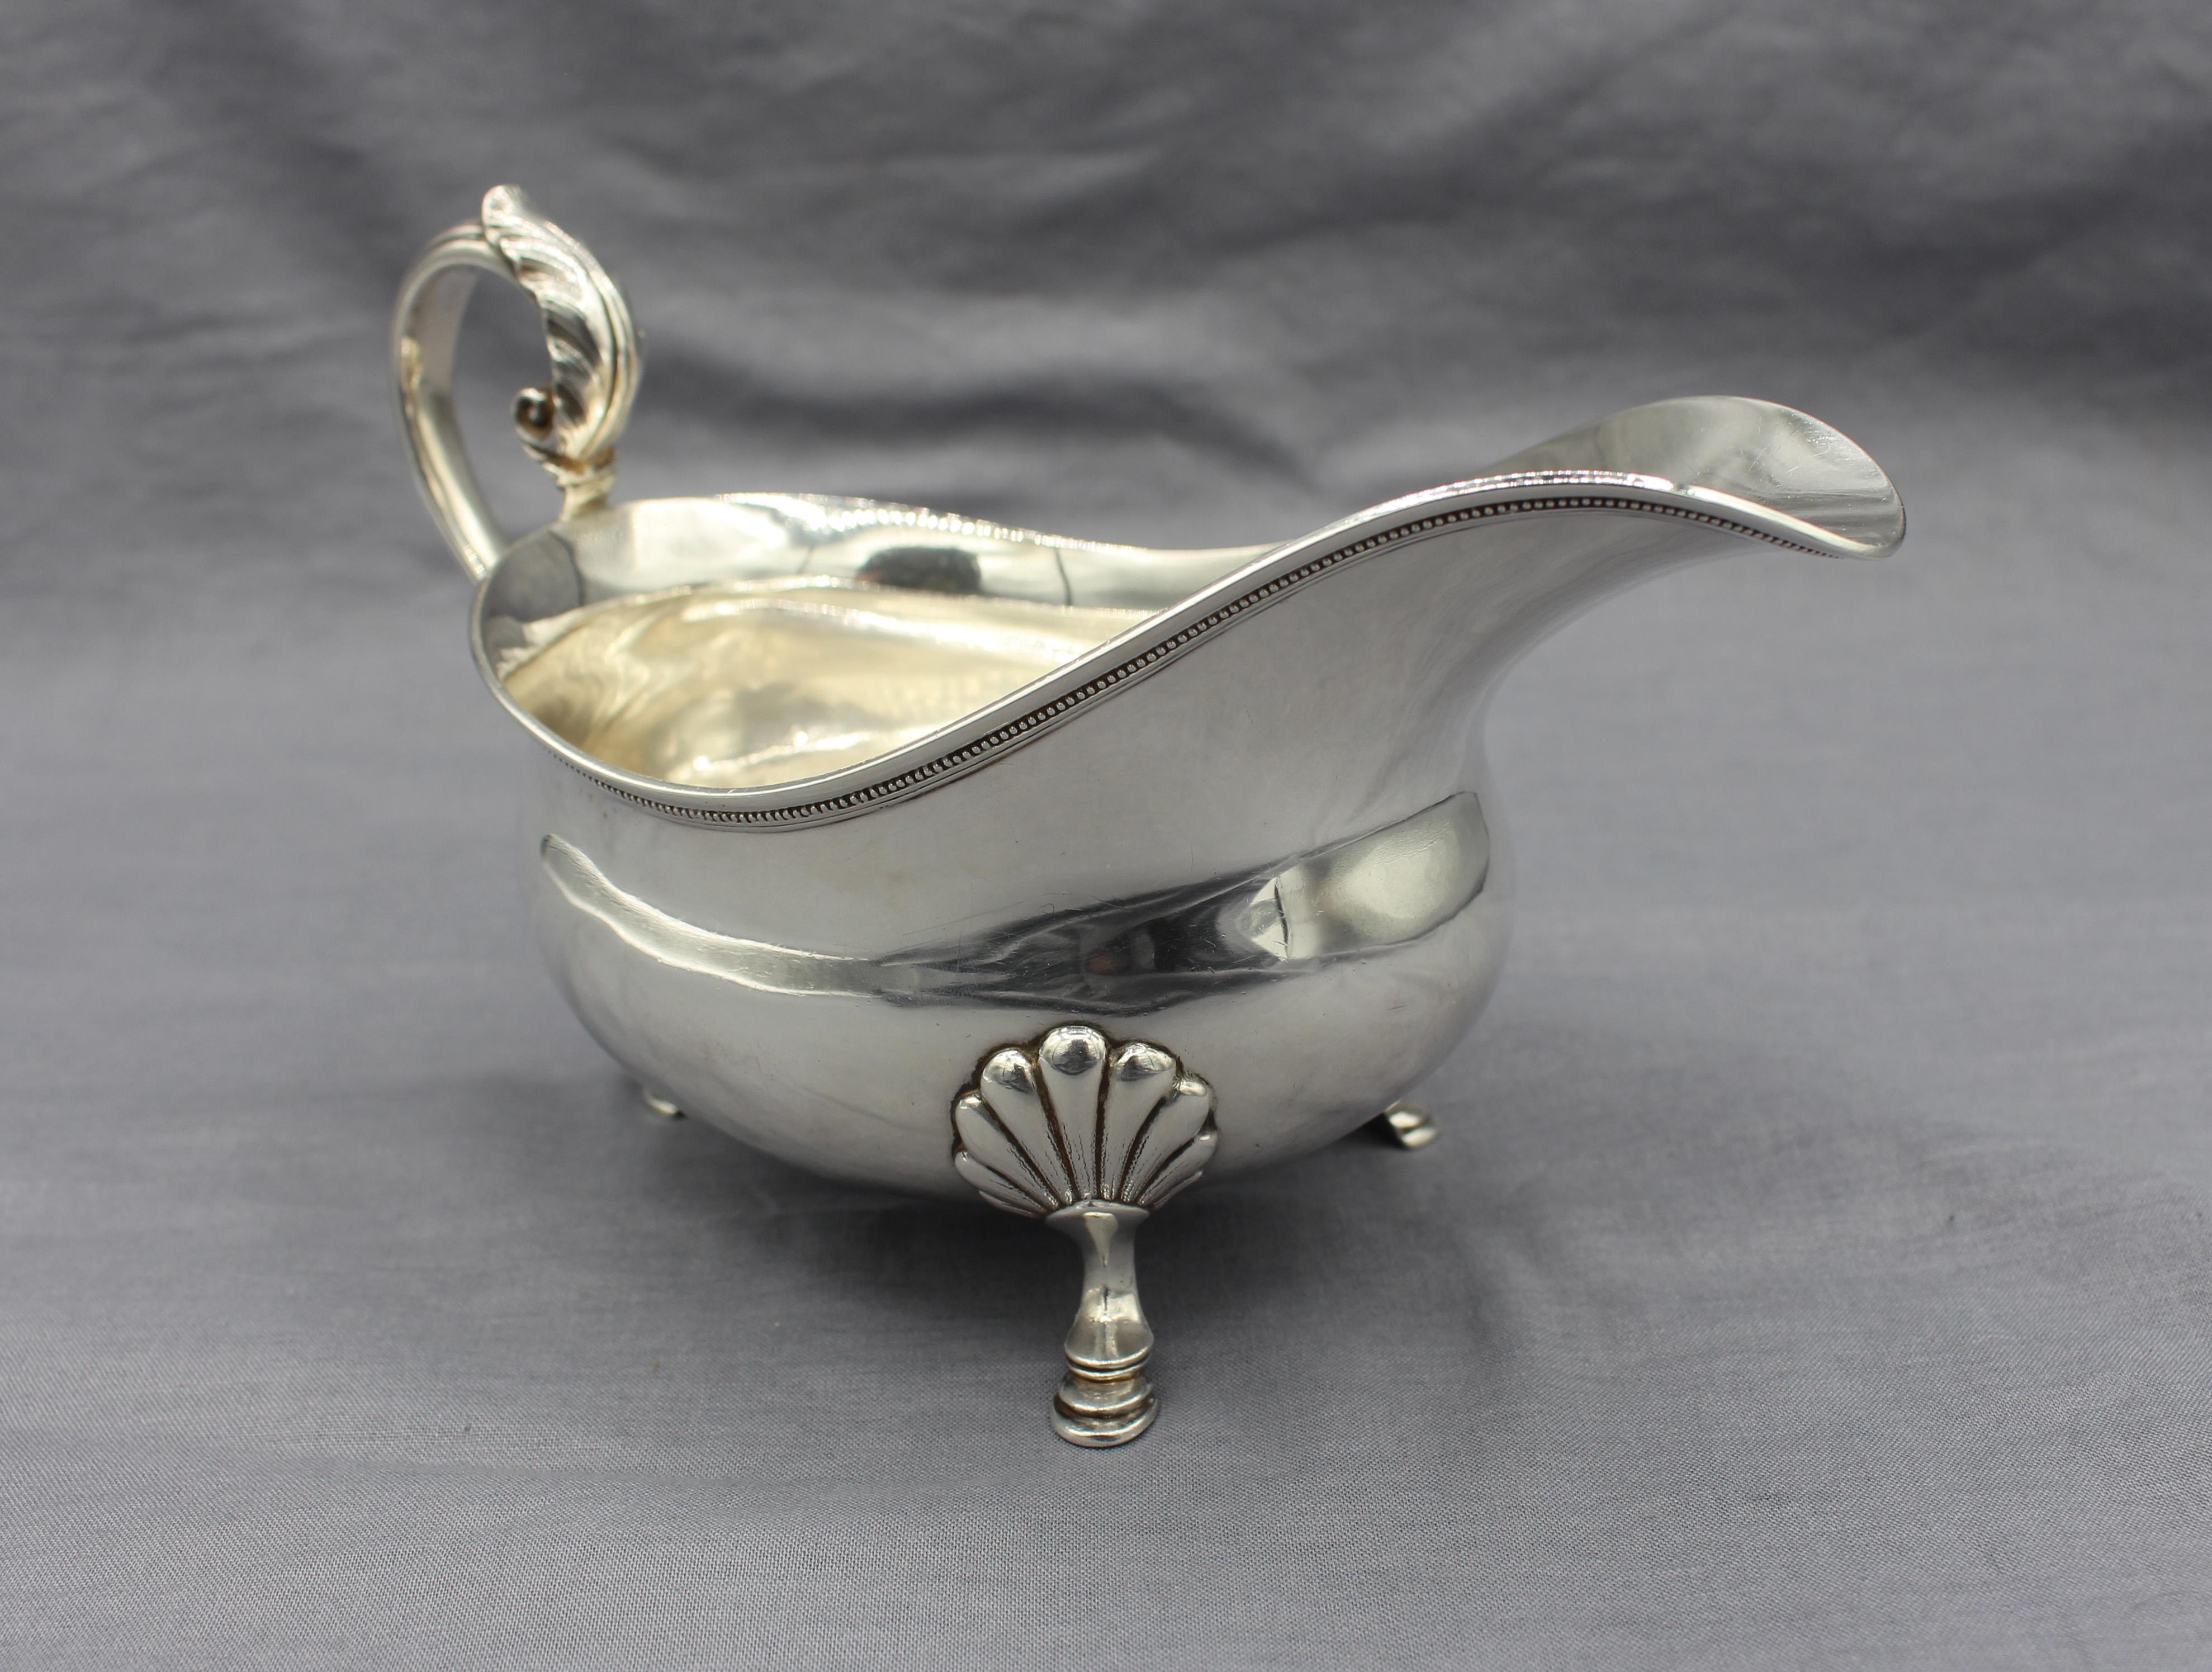 1907-1947 Tiffany sterling silver gravy boat. George II style, raised on hoof feet with shell knees & leaf mounted s-scroll handle. #4606/6281. Pattern of 1876. Made in the era of John C. Moore, 1907-1947. Some light denting. 7.60 troy oz. Measures: